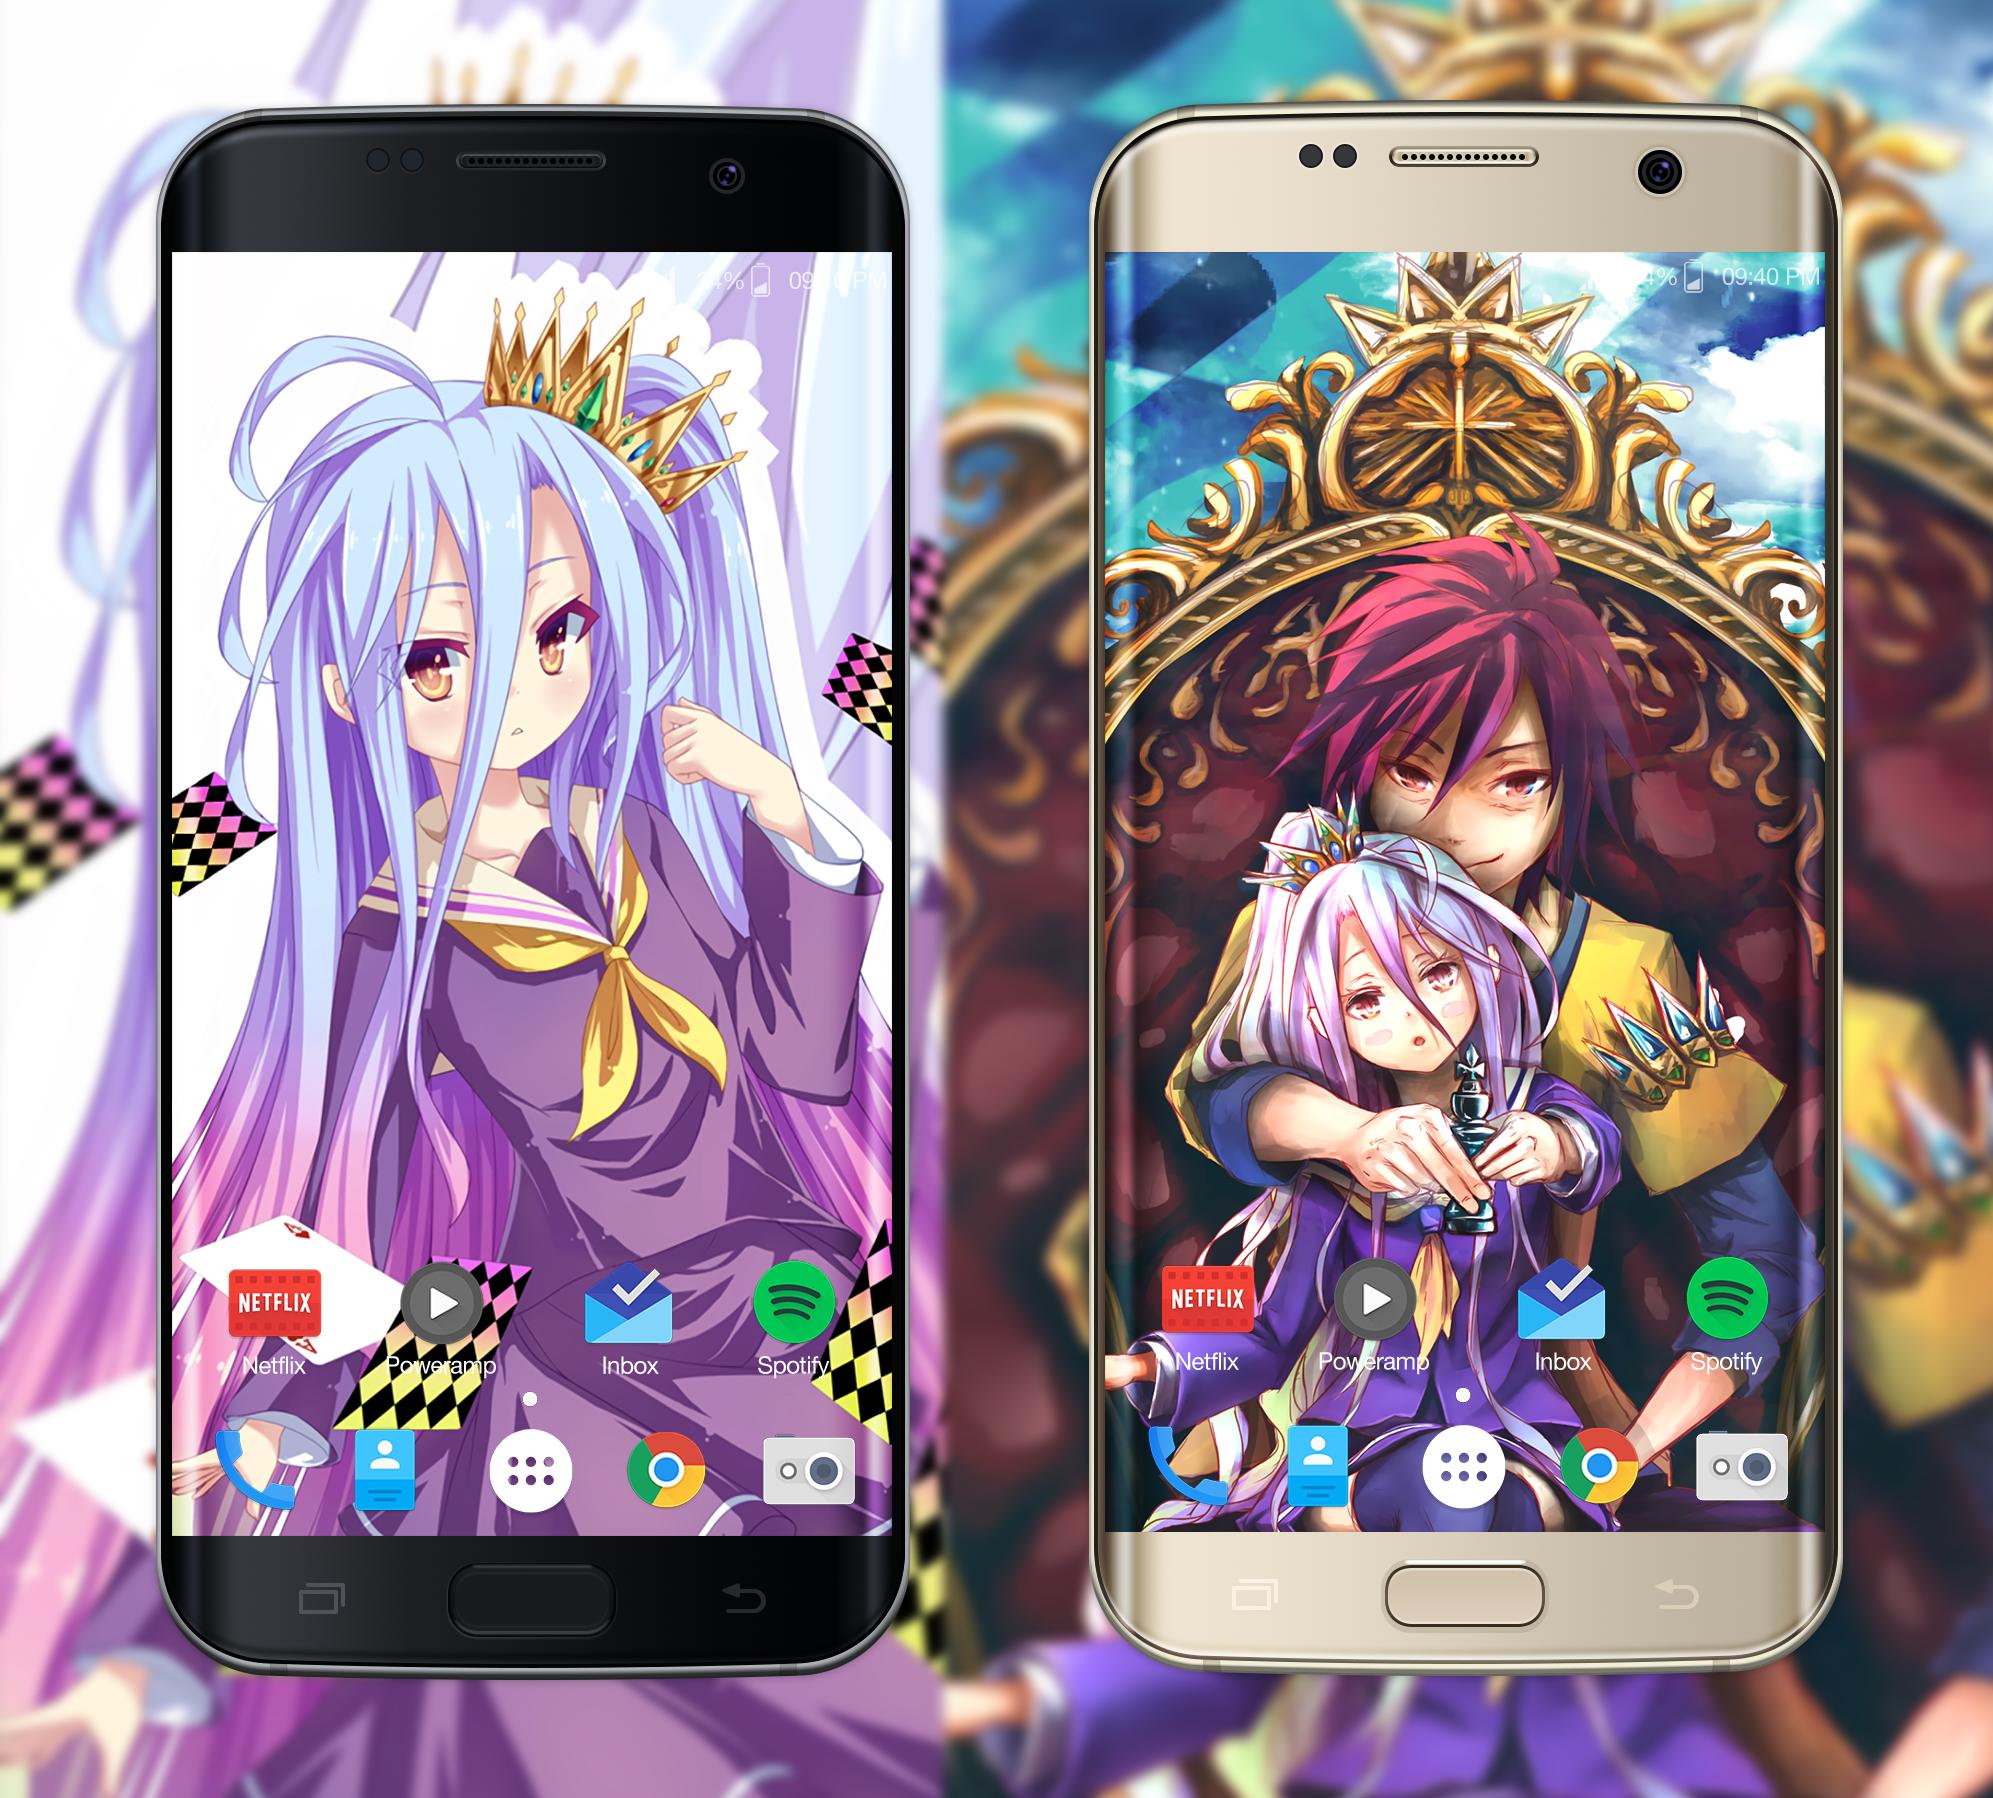 Shiro Anime Wallpaper For Android Apk Download